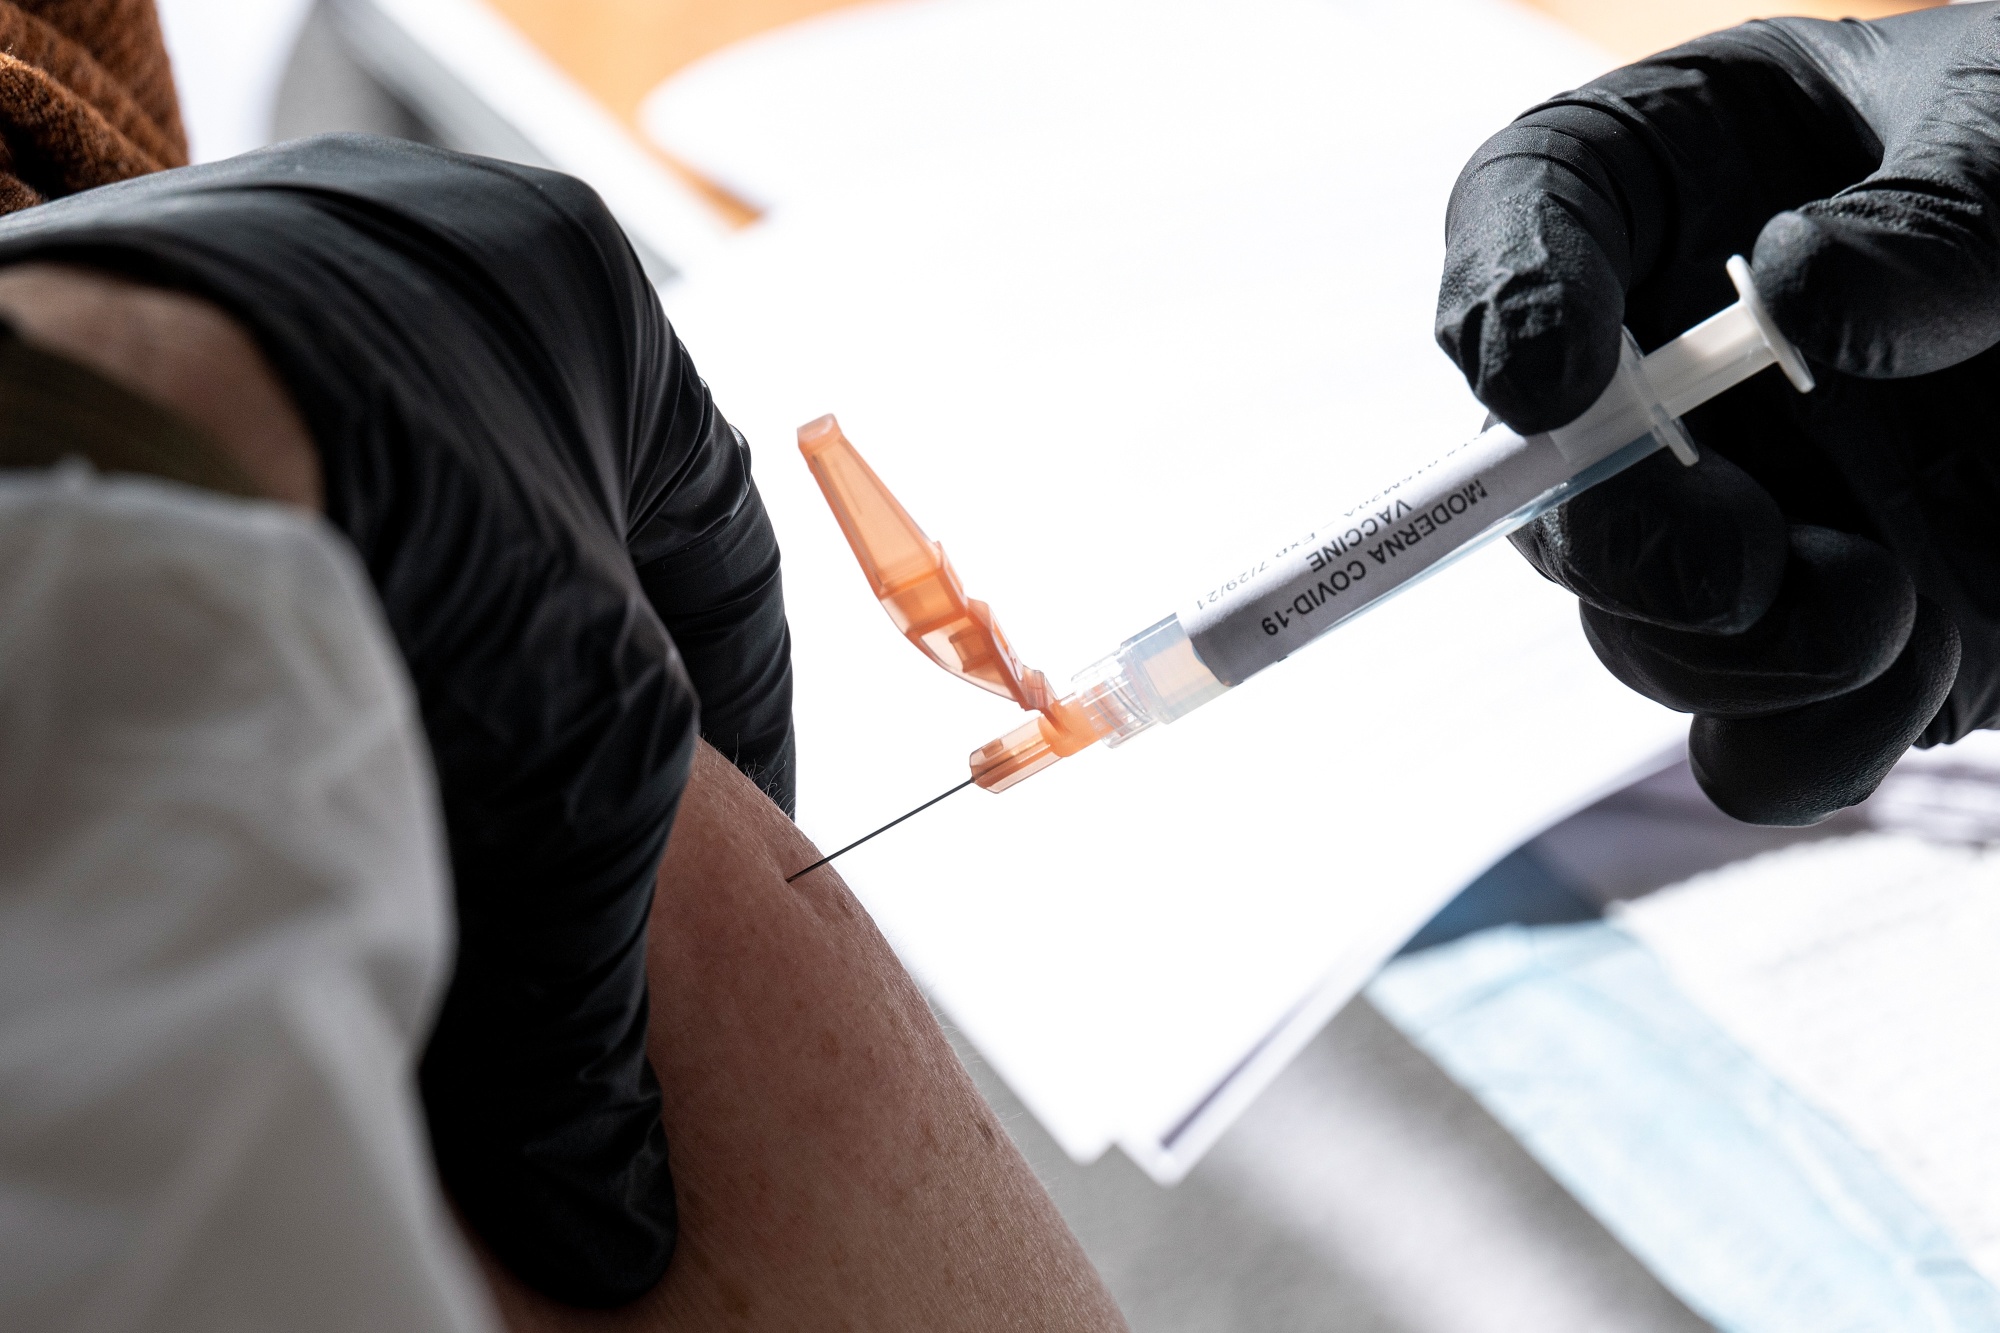 Covid-19 Vaccination Site Opens In San Francisco's Mission District 